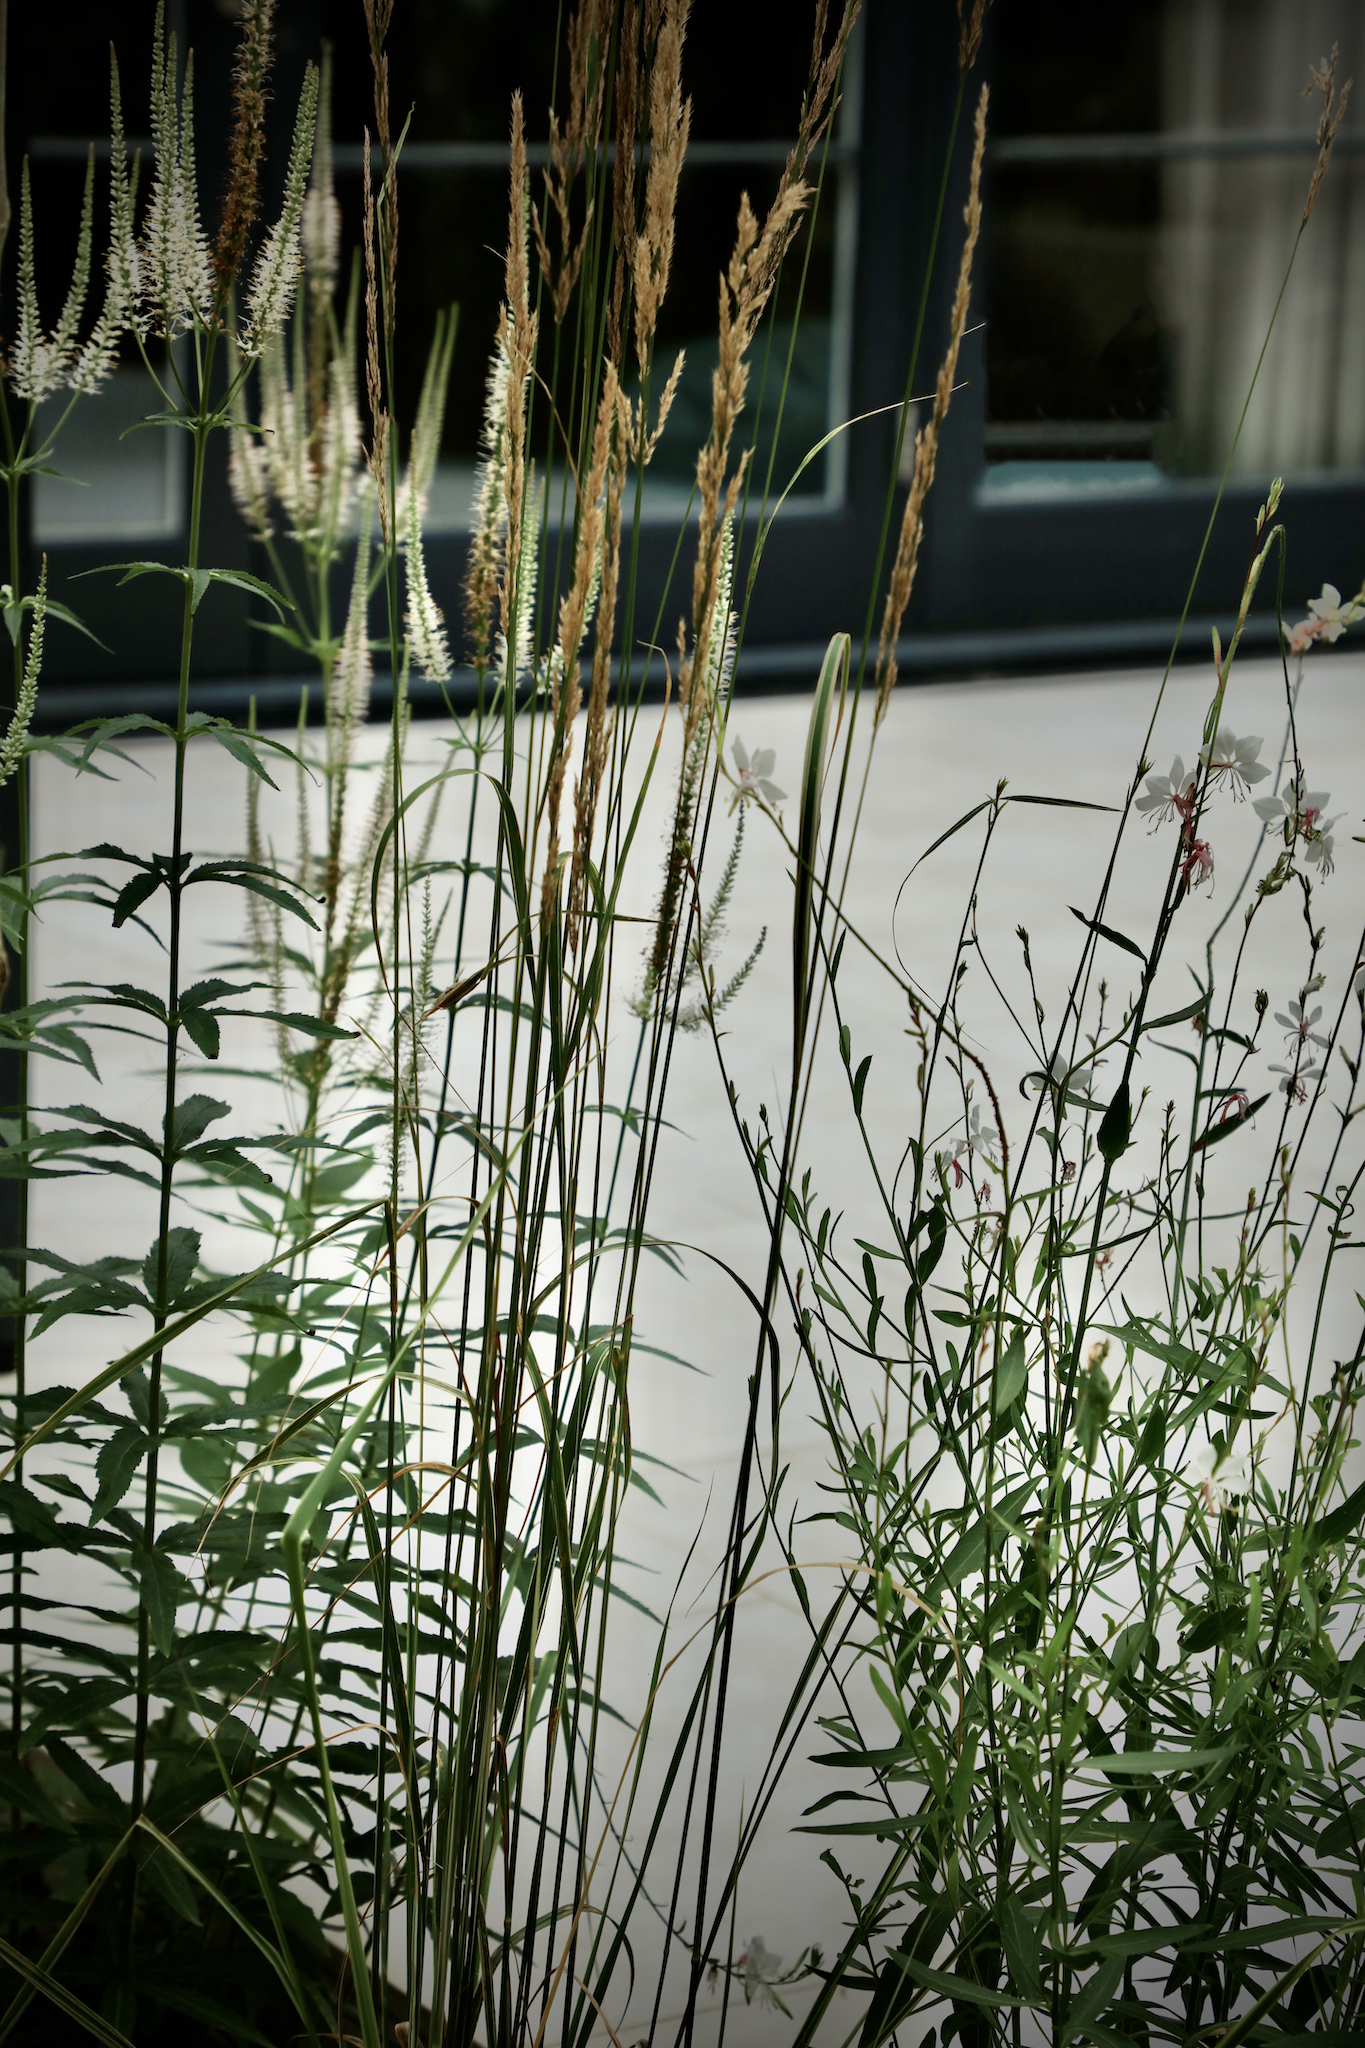 Architectural planting of Karl foresters and Veronicastrum